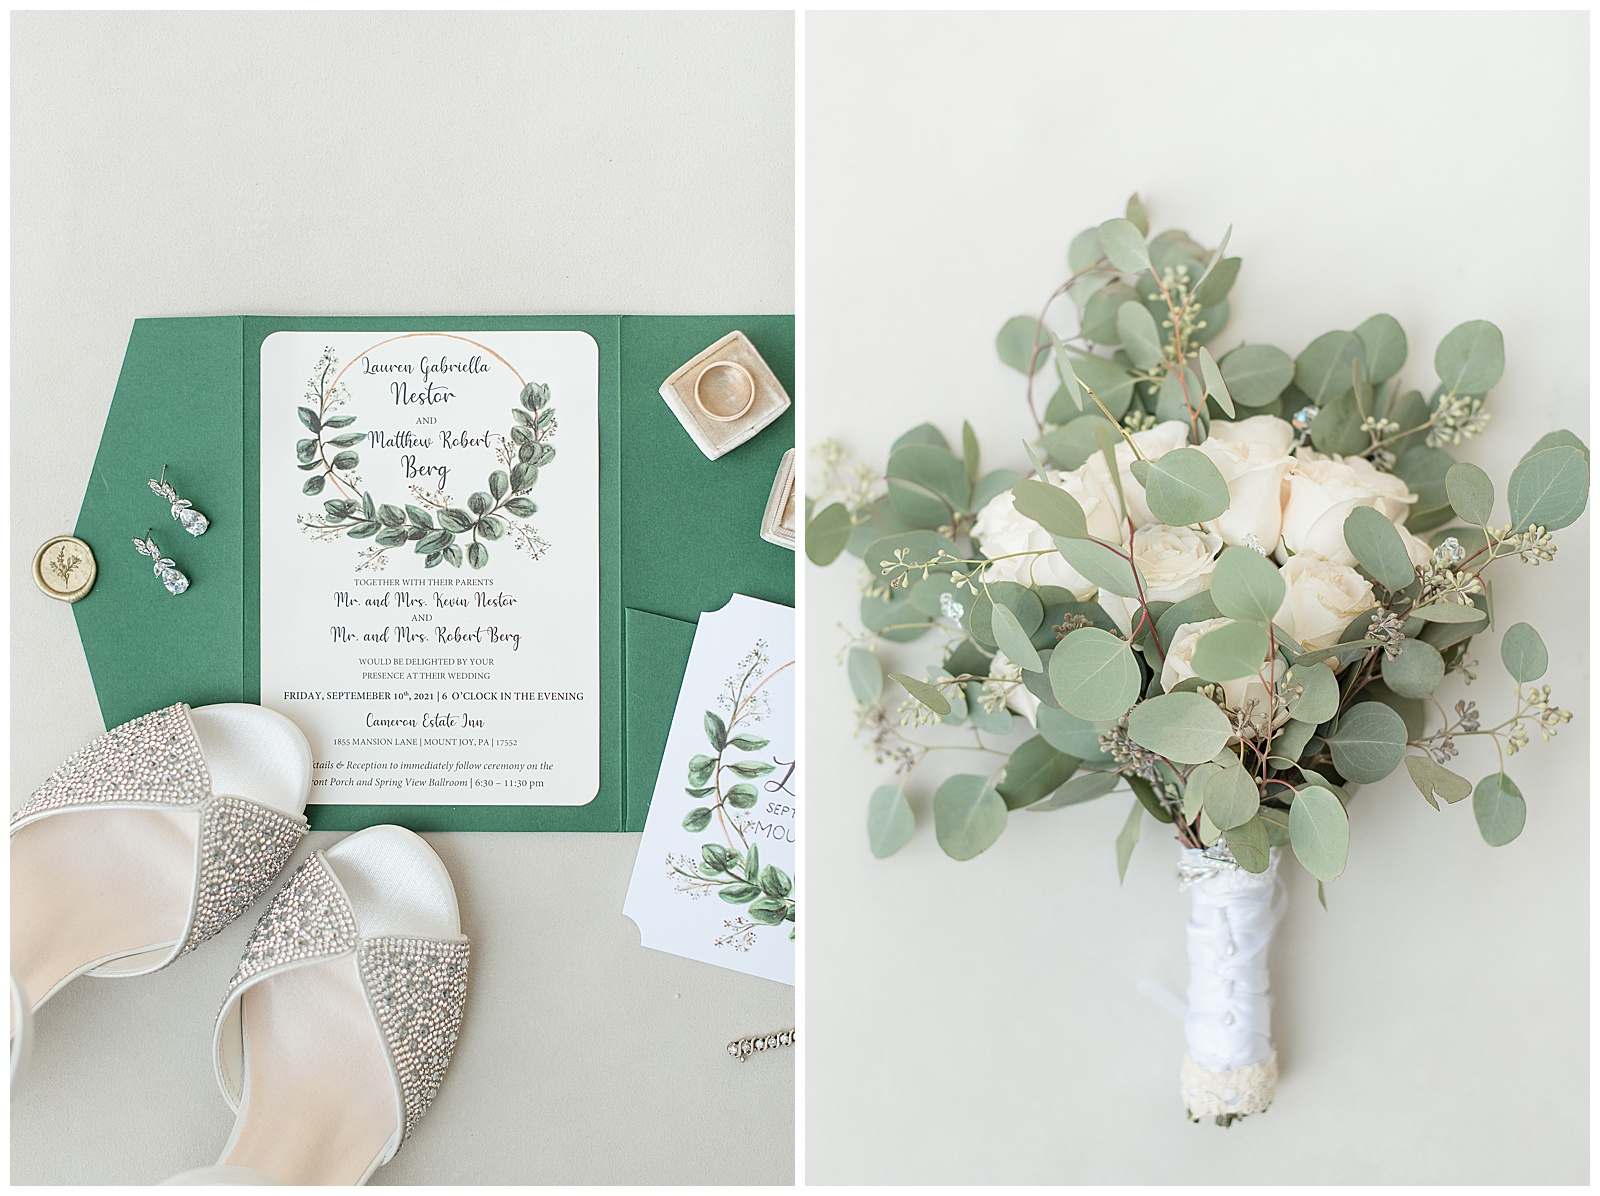 wedding invitation and bouquet of silver dollar eucalyptus and white roses displayed on white background